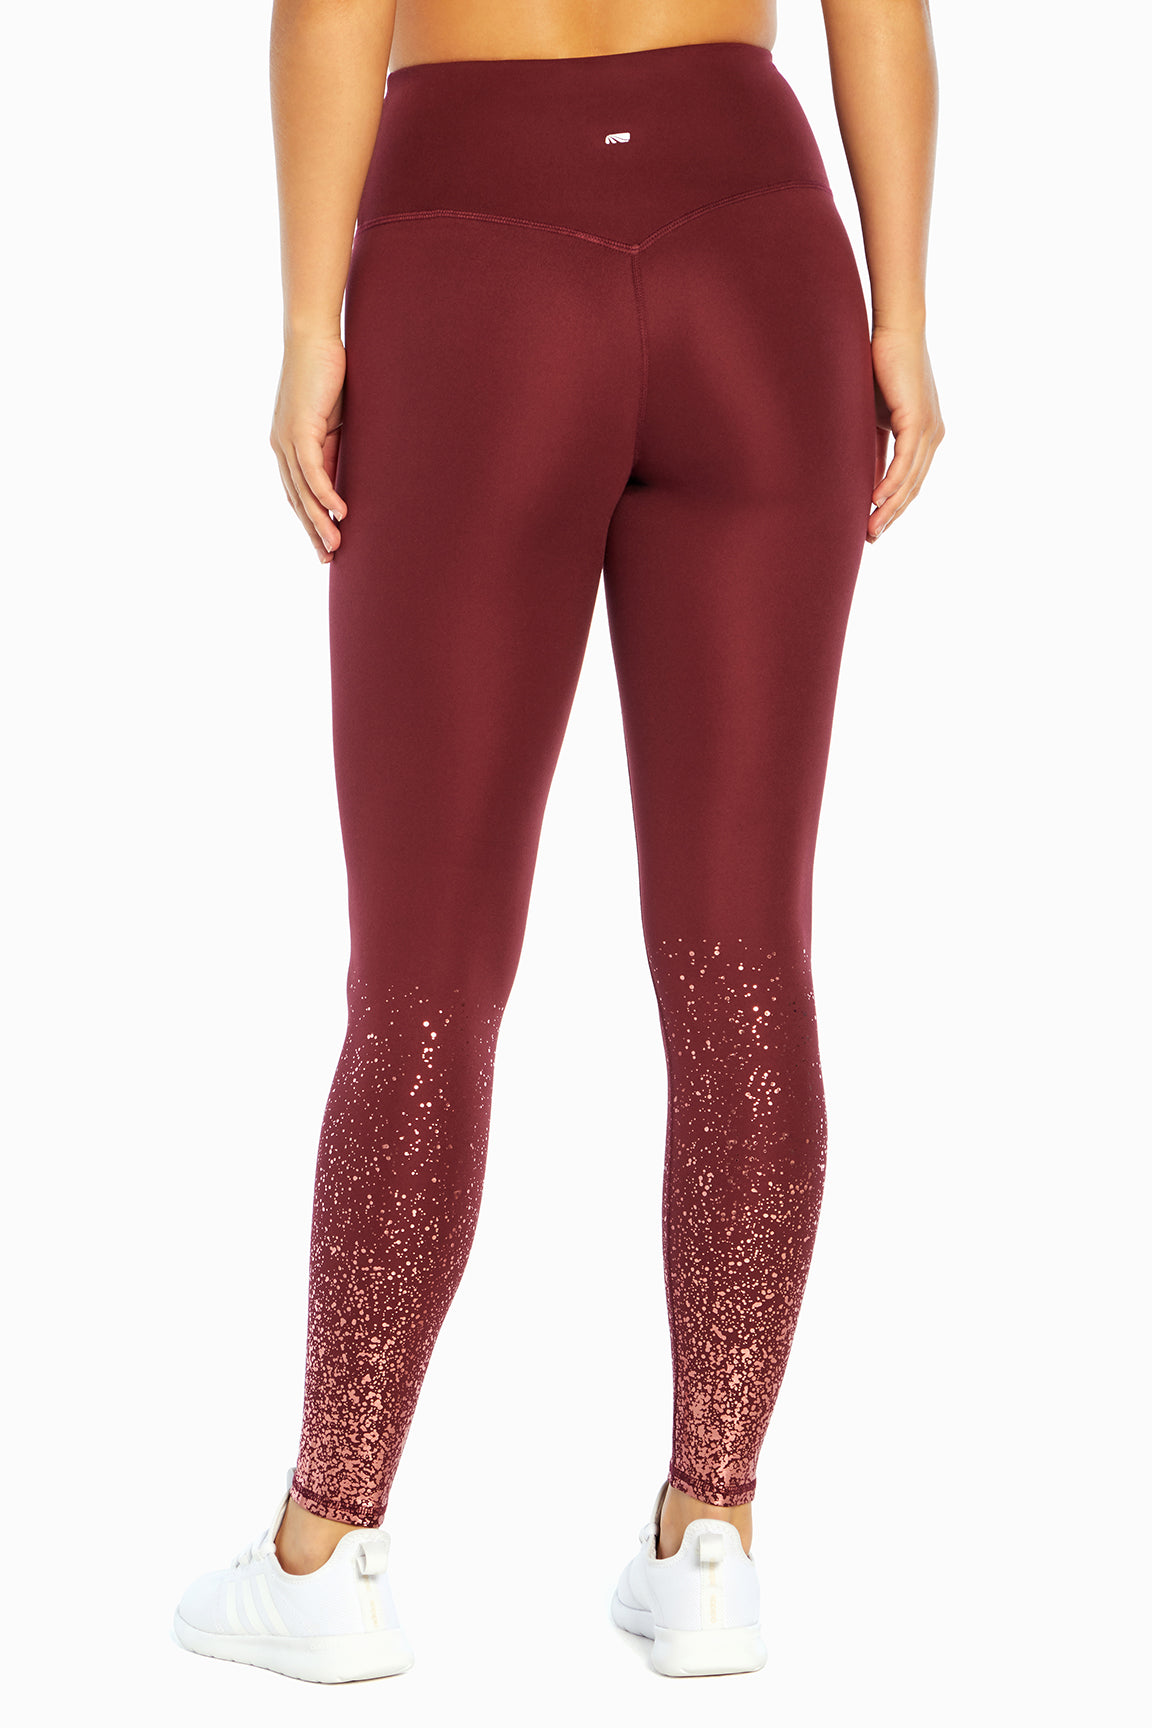 Get a Shimmering Look with Prisma's Cream Leggings